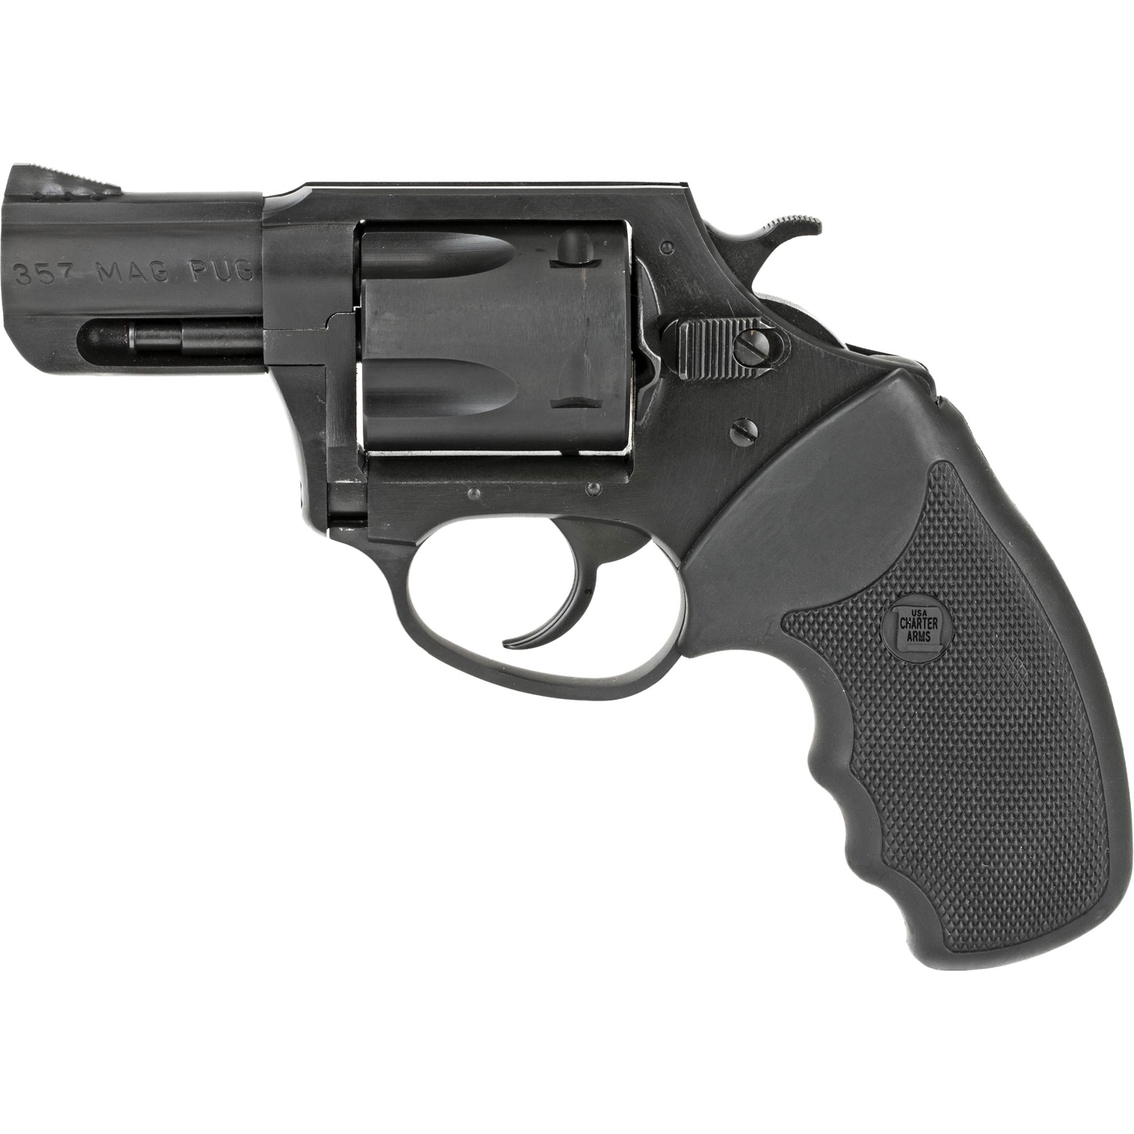 Charter Arms Mag Pug 357 Mag 2.2 in. Barrel 5 Rds Revolver Black - Image 2 of 3